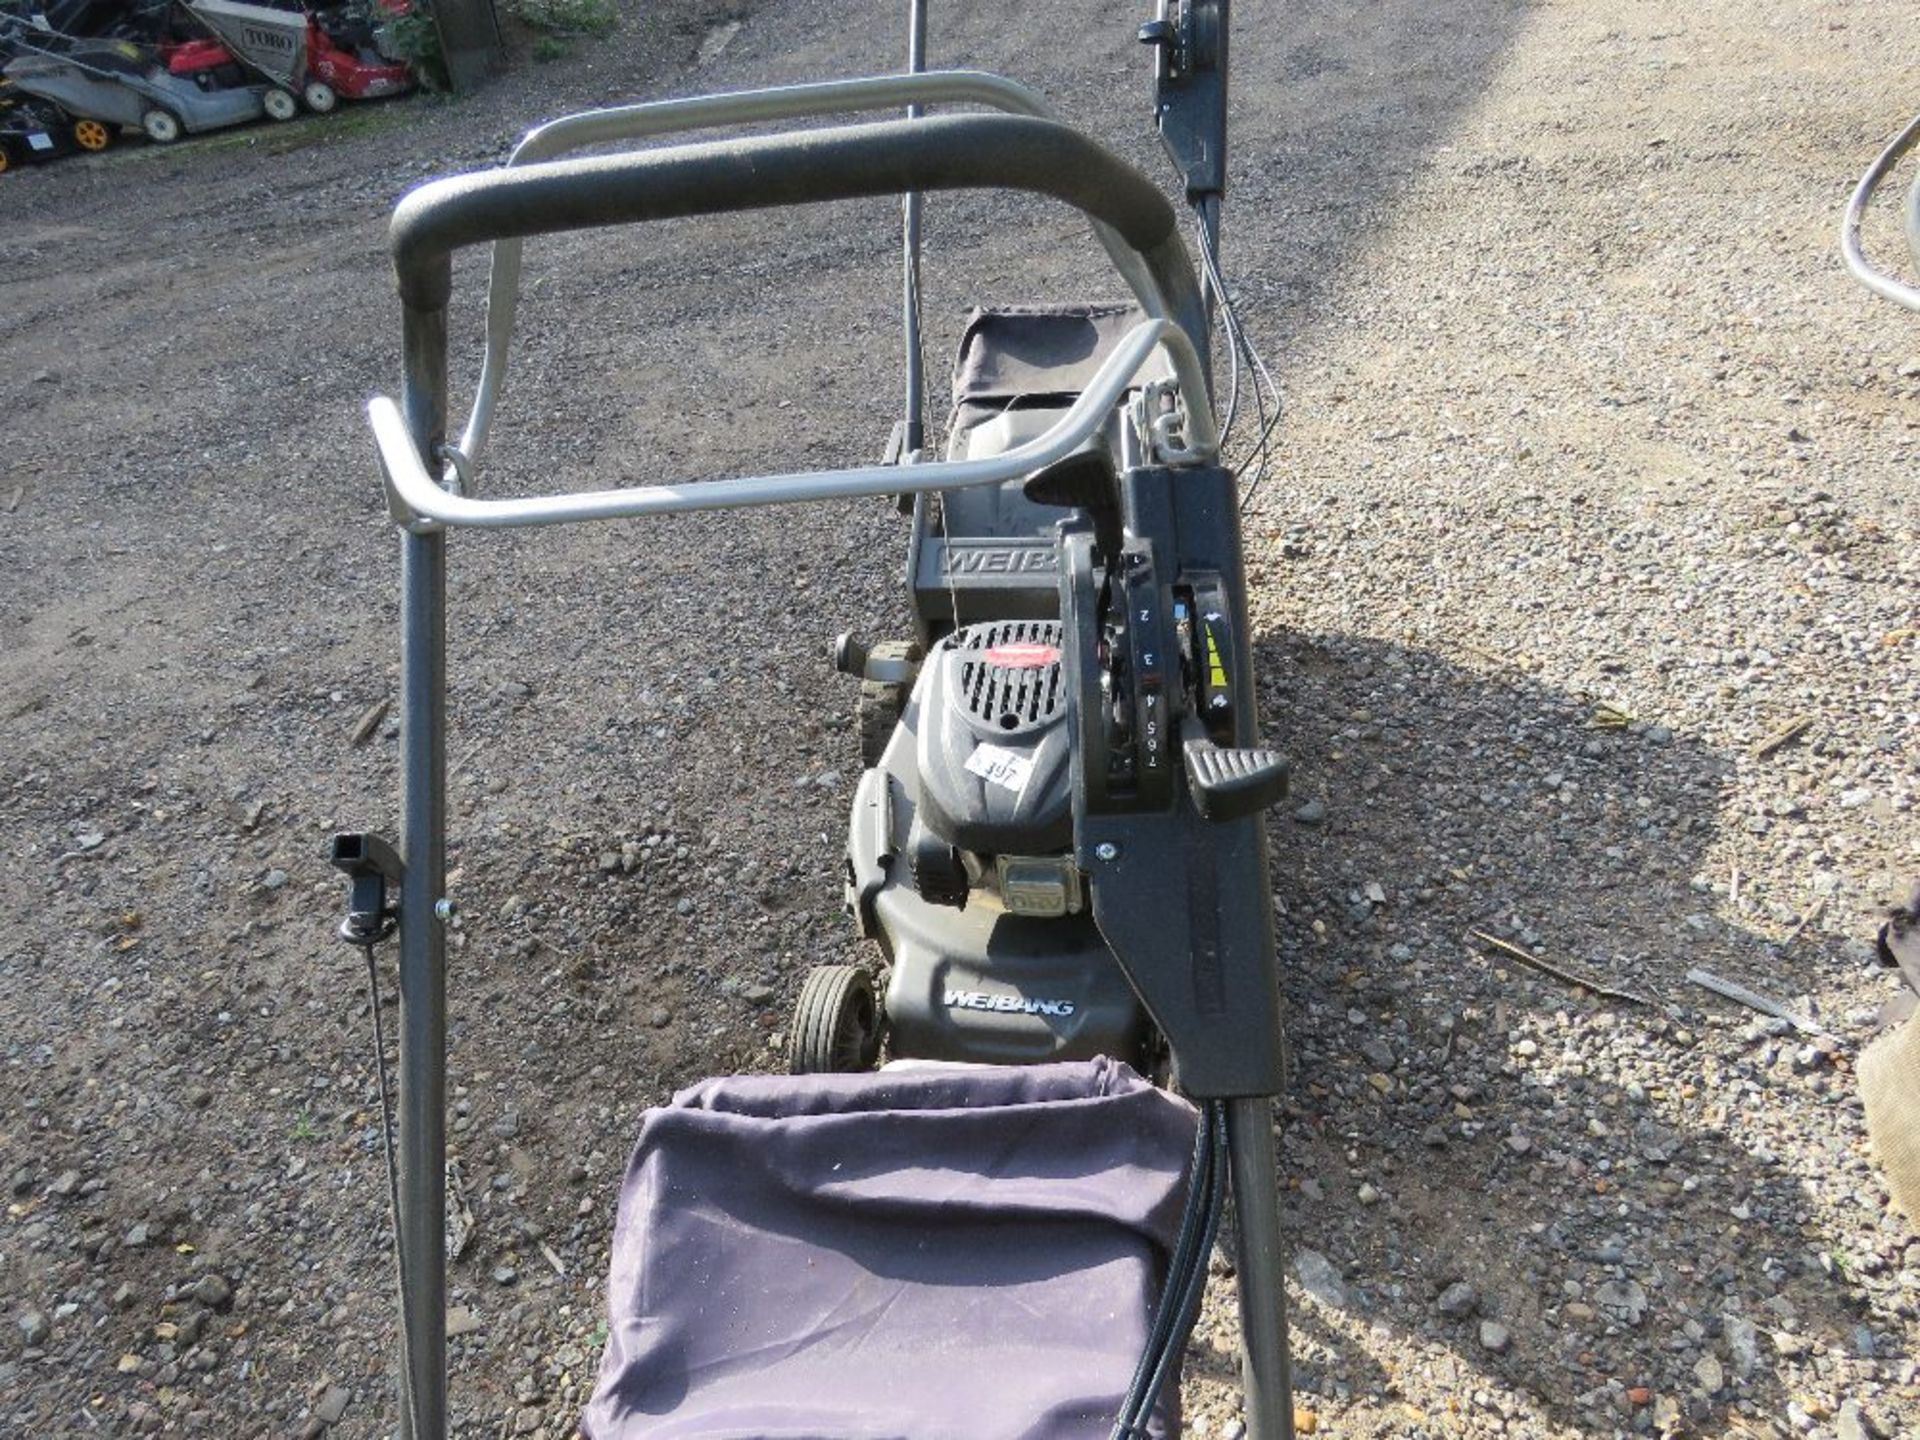 WEIBANG PROFESSIONAL SELF DRIVE LAWNMOWER WITH COLLECTOR, YEAR 2021 APPROX. DIRECT FROM LOCAL LANDSC - Image 3 of 3